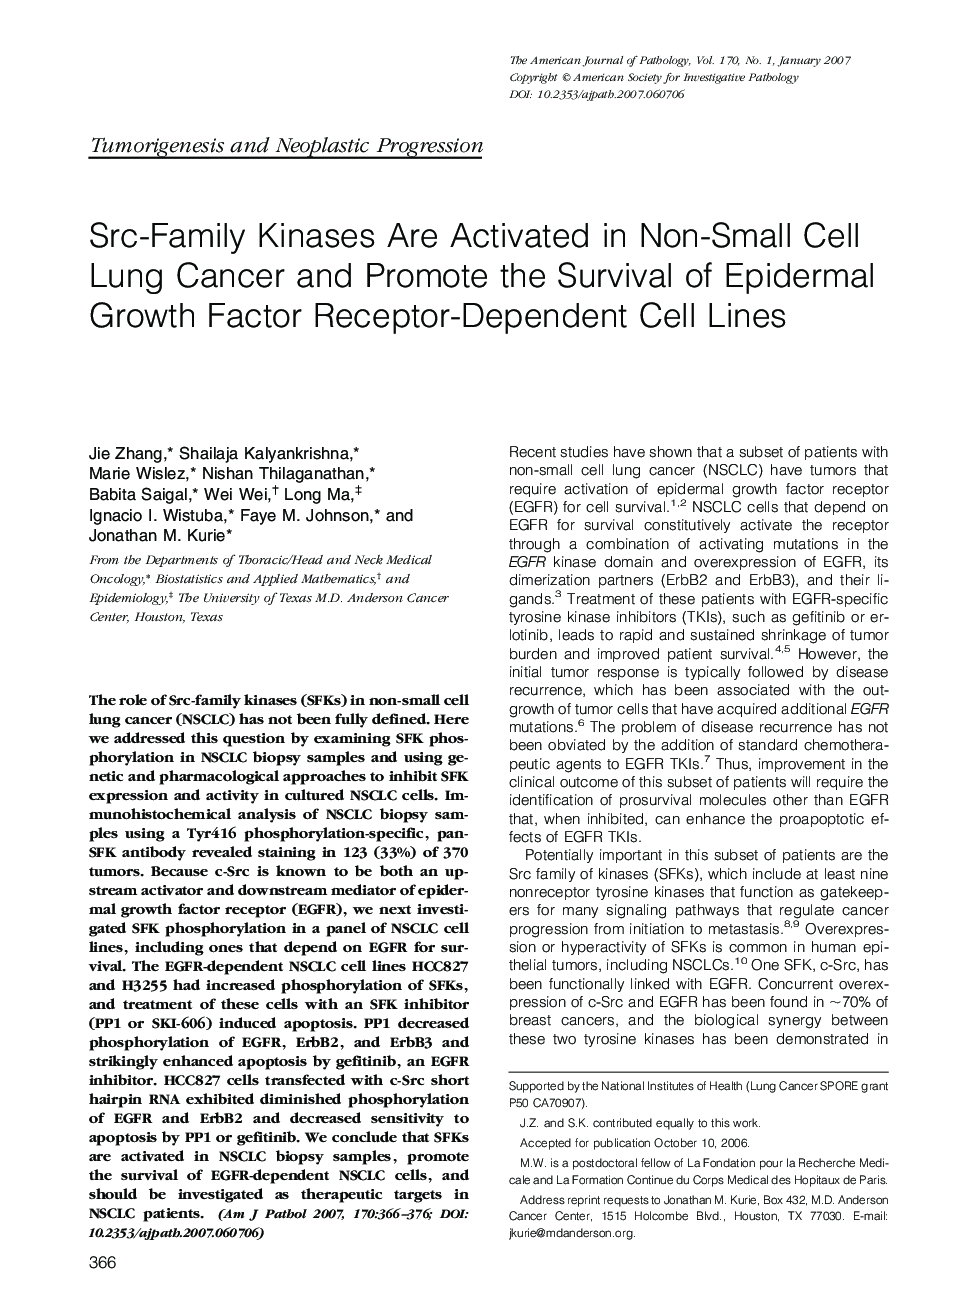 Src-Family Kinases Are Activated in Non-Small Cell Lung Cancer and Promote the Survival of Epidermal Growth Factor Receptor-Dependent Cell Lines 